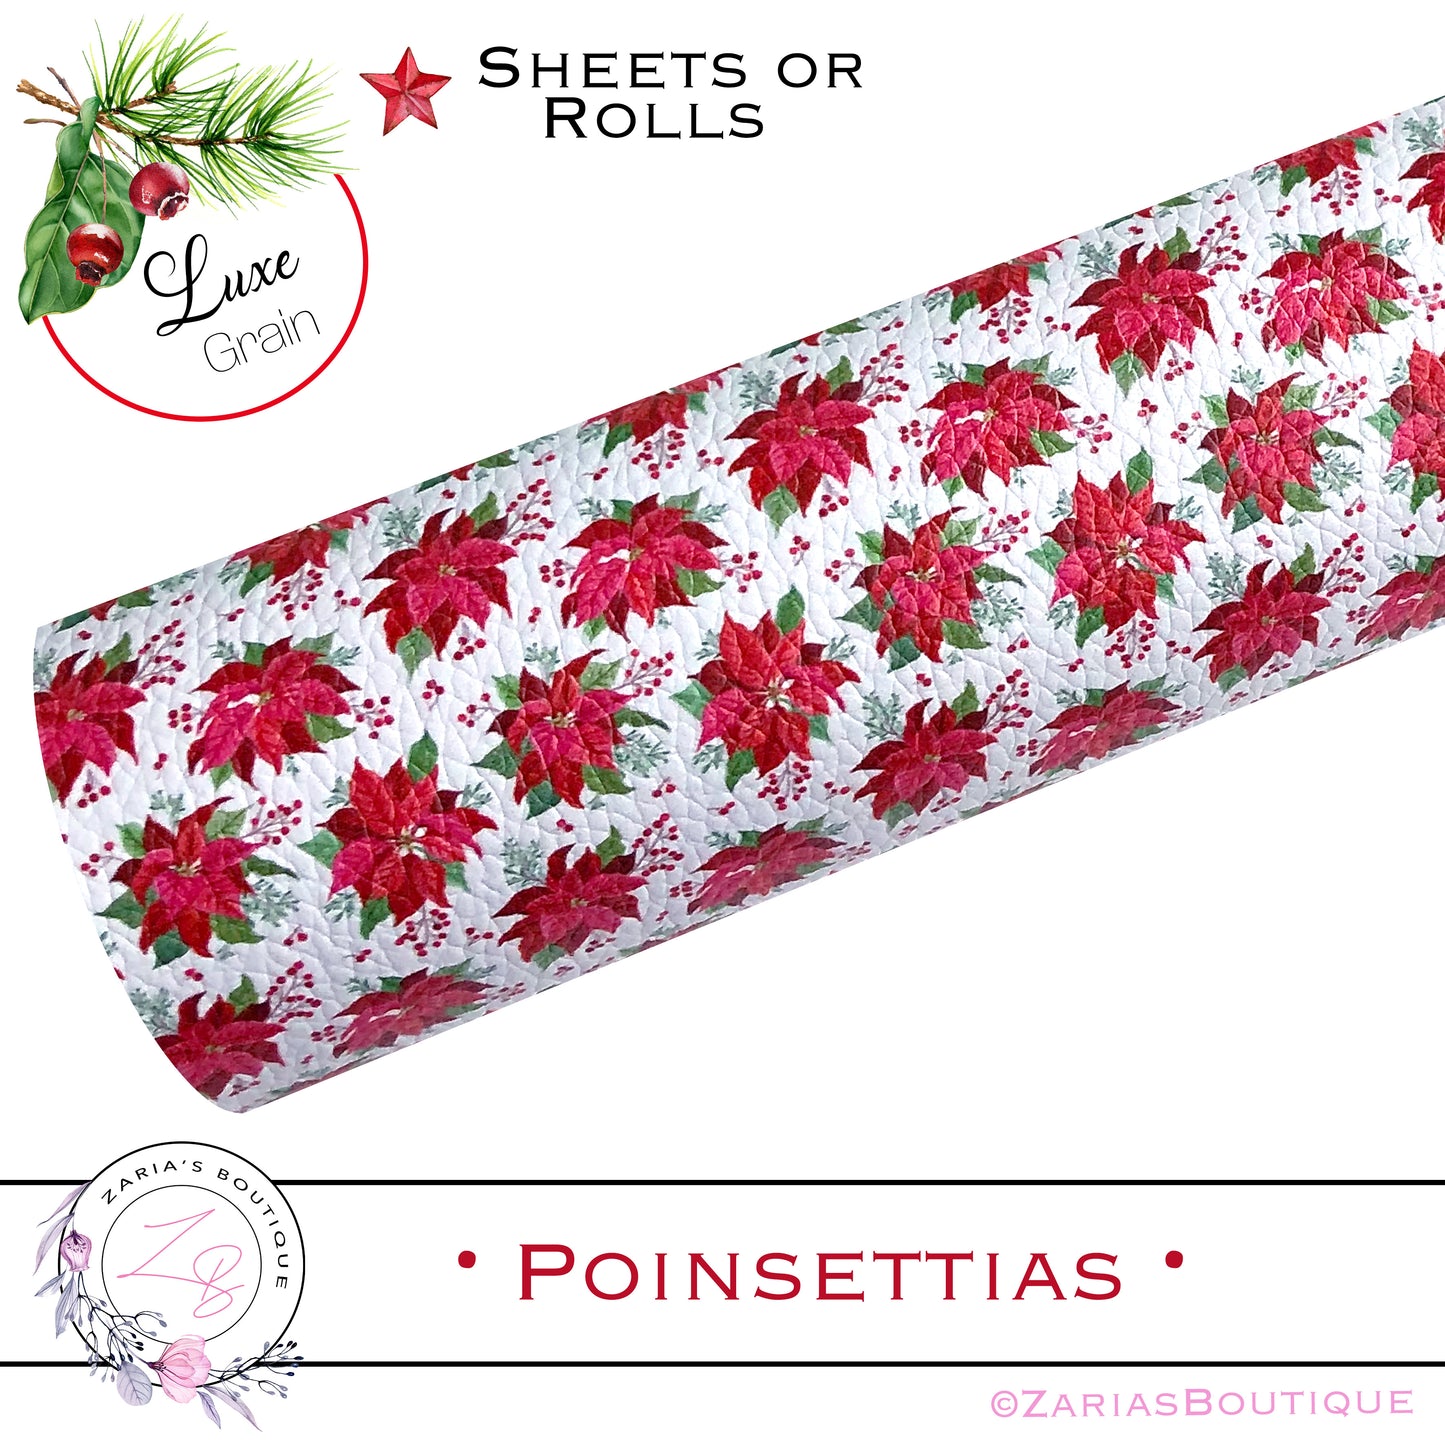 ⋅ Christmas Poinsettias ⋅ Luxe Vegan Faux Leather ⋅ Sheets or Rolls! ⋅